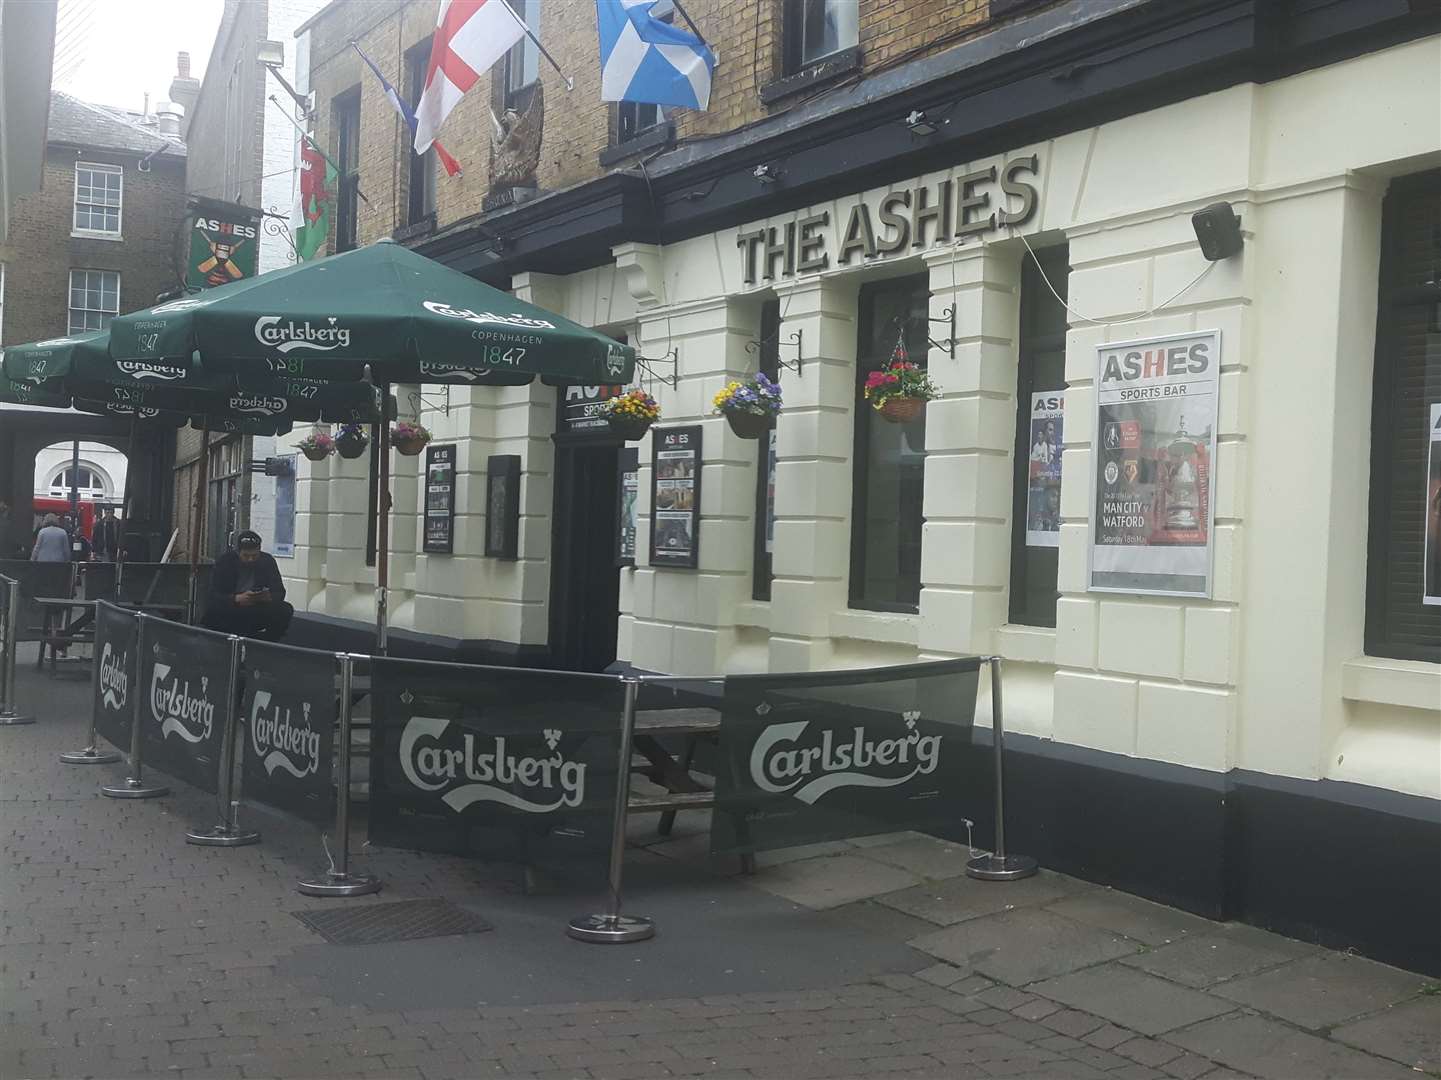 The Ashes pub and sports bar in Market Buildings, Maidstone